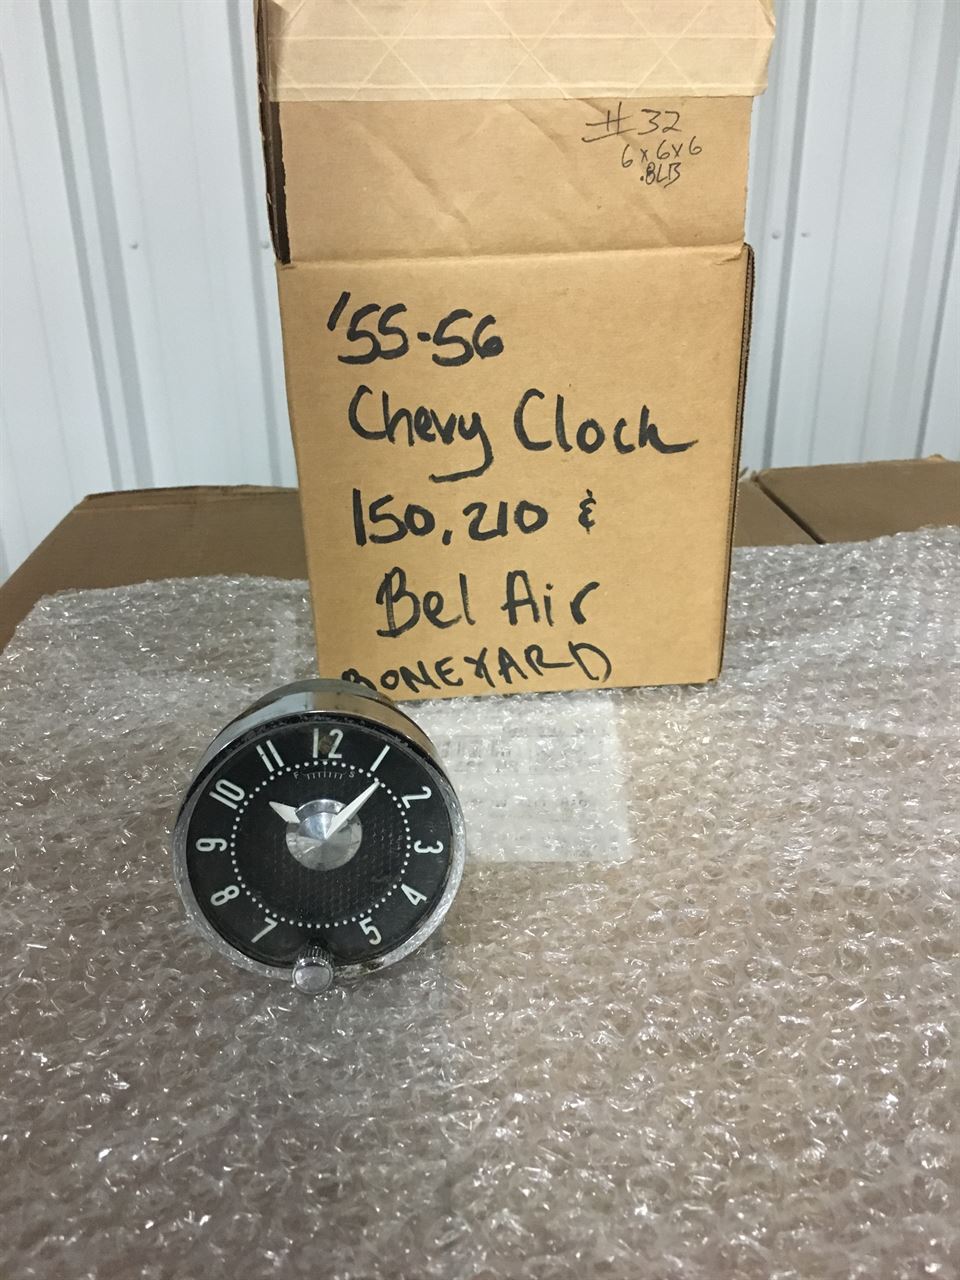 Picture of 1955-56 Chevy Clock 150 210 & Bel Air